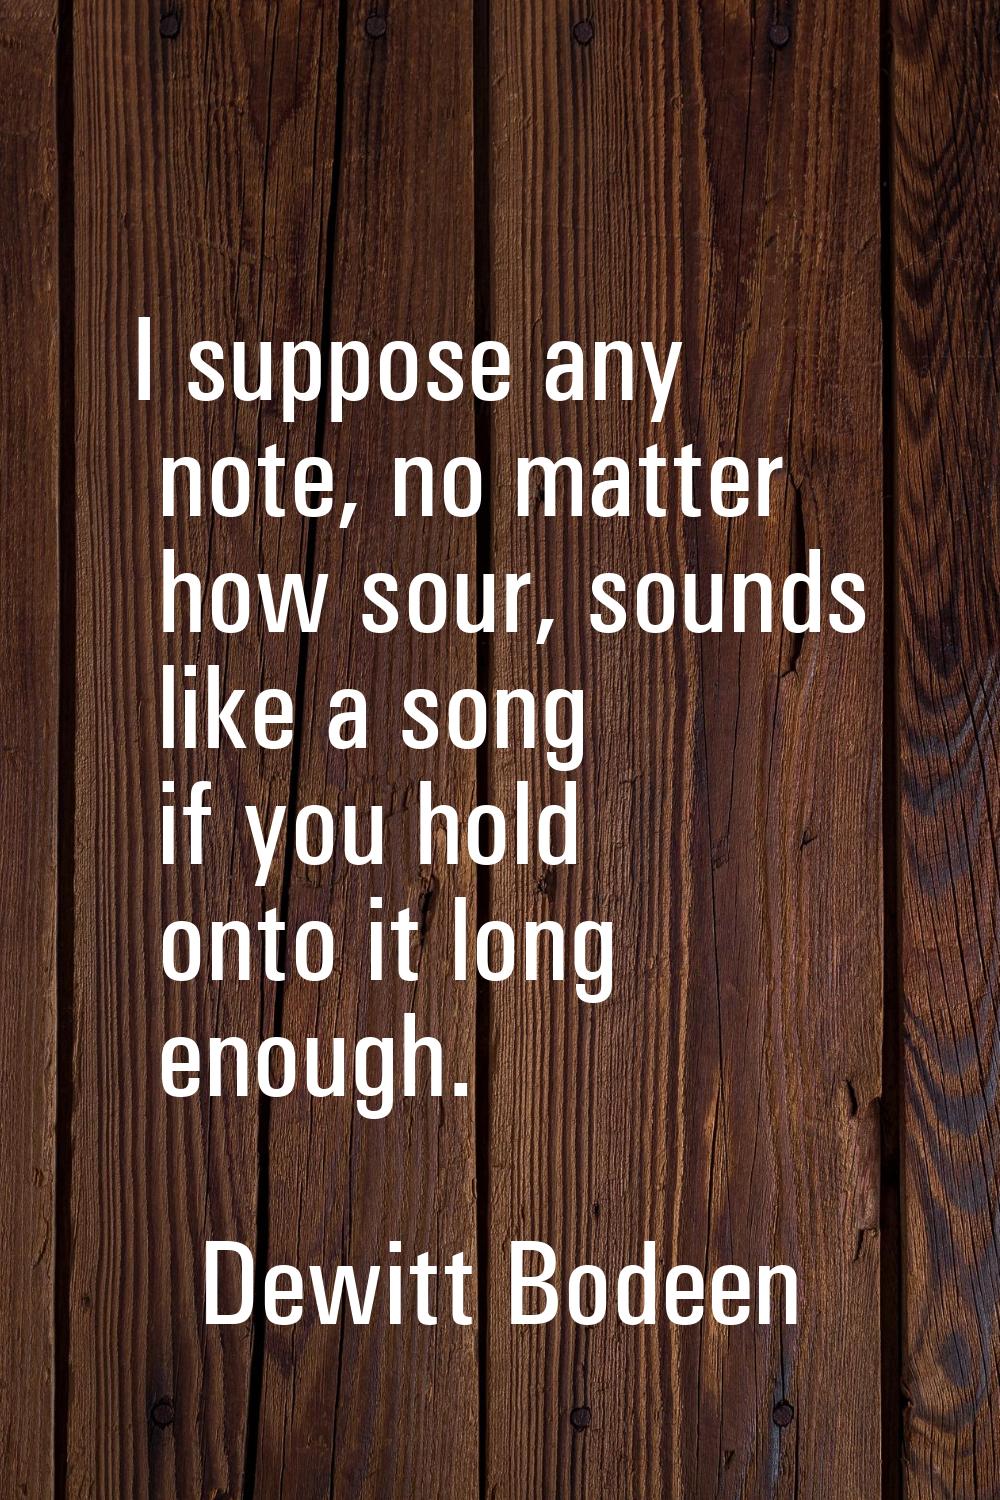 I suppose any note, no matter how sour, sounds like a song if you hold onto it long enough.